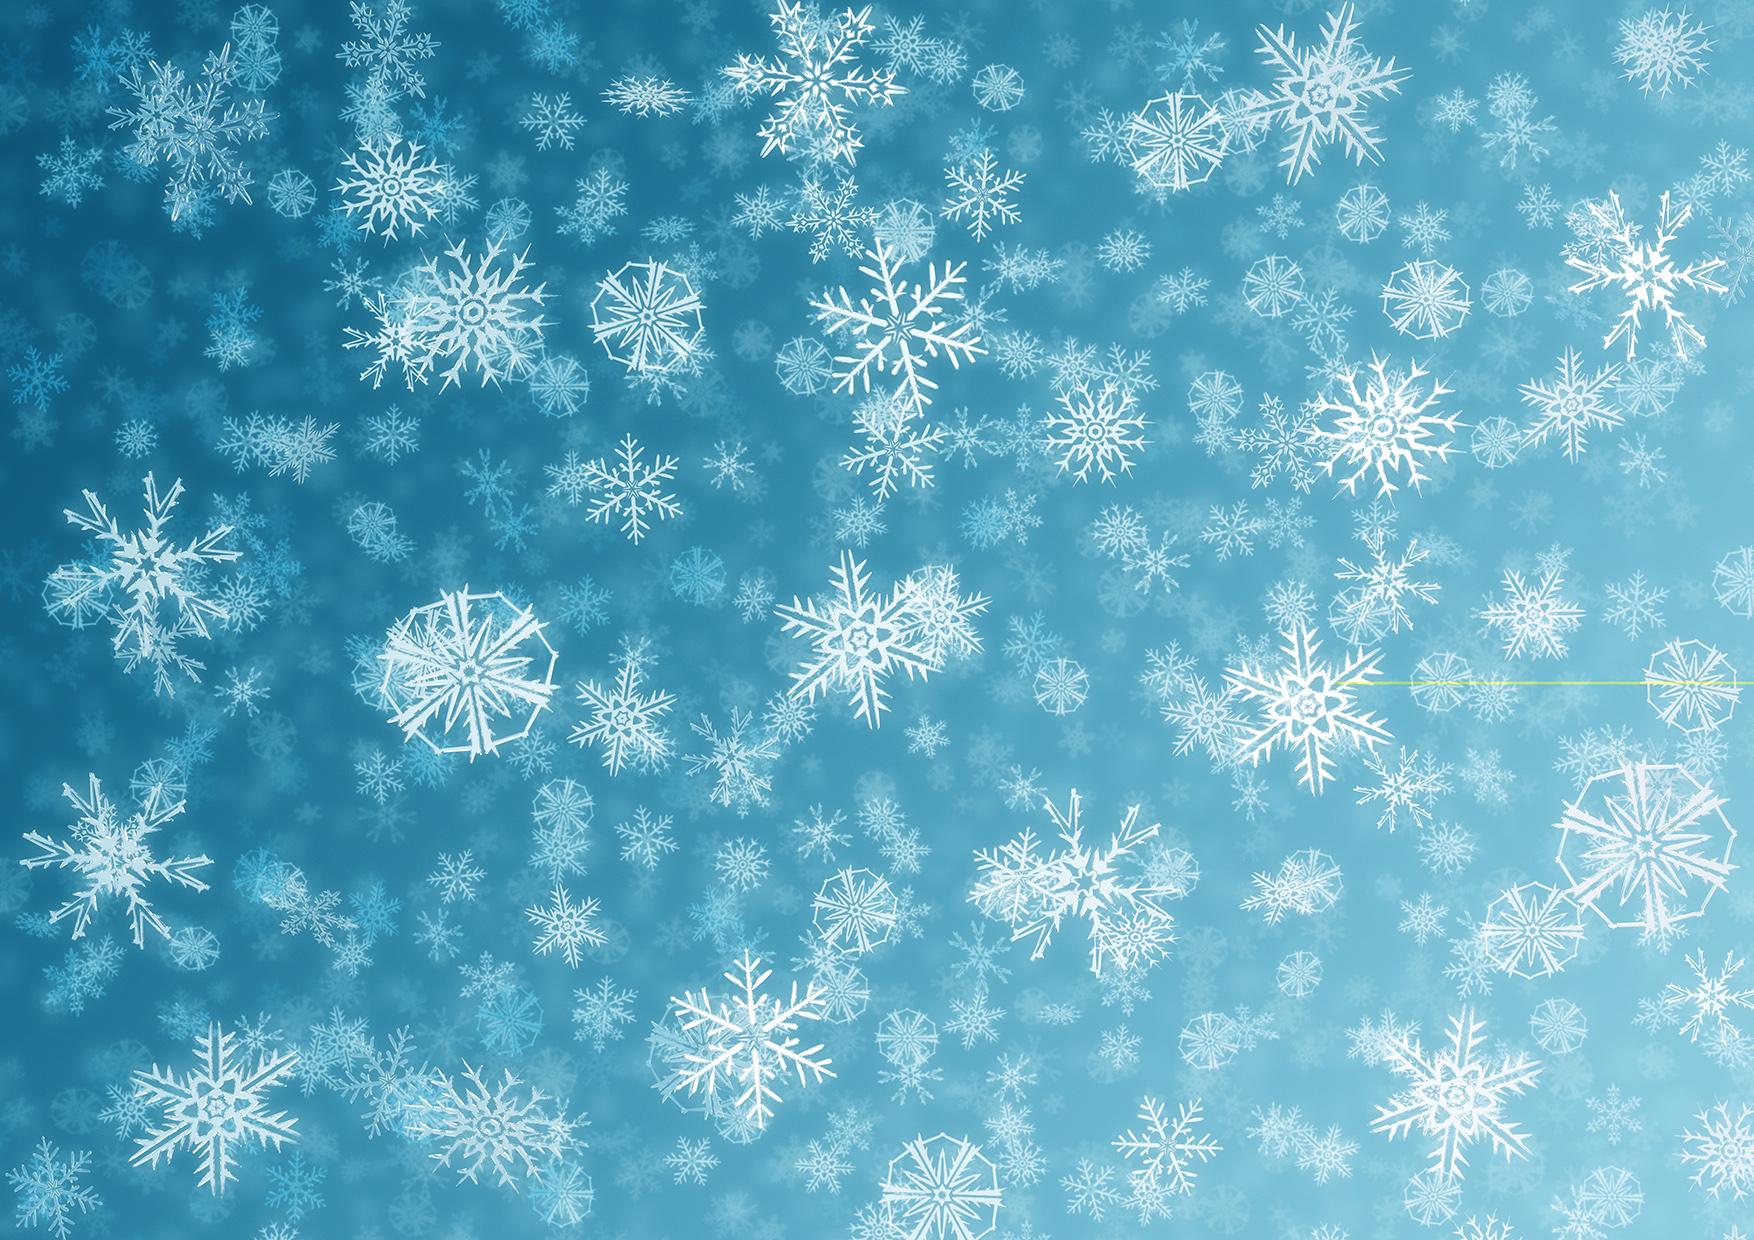 Snow PPT Backgrounds